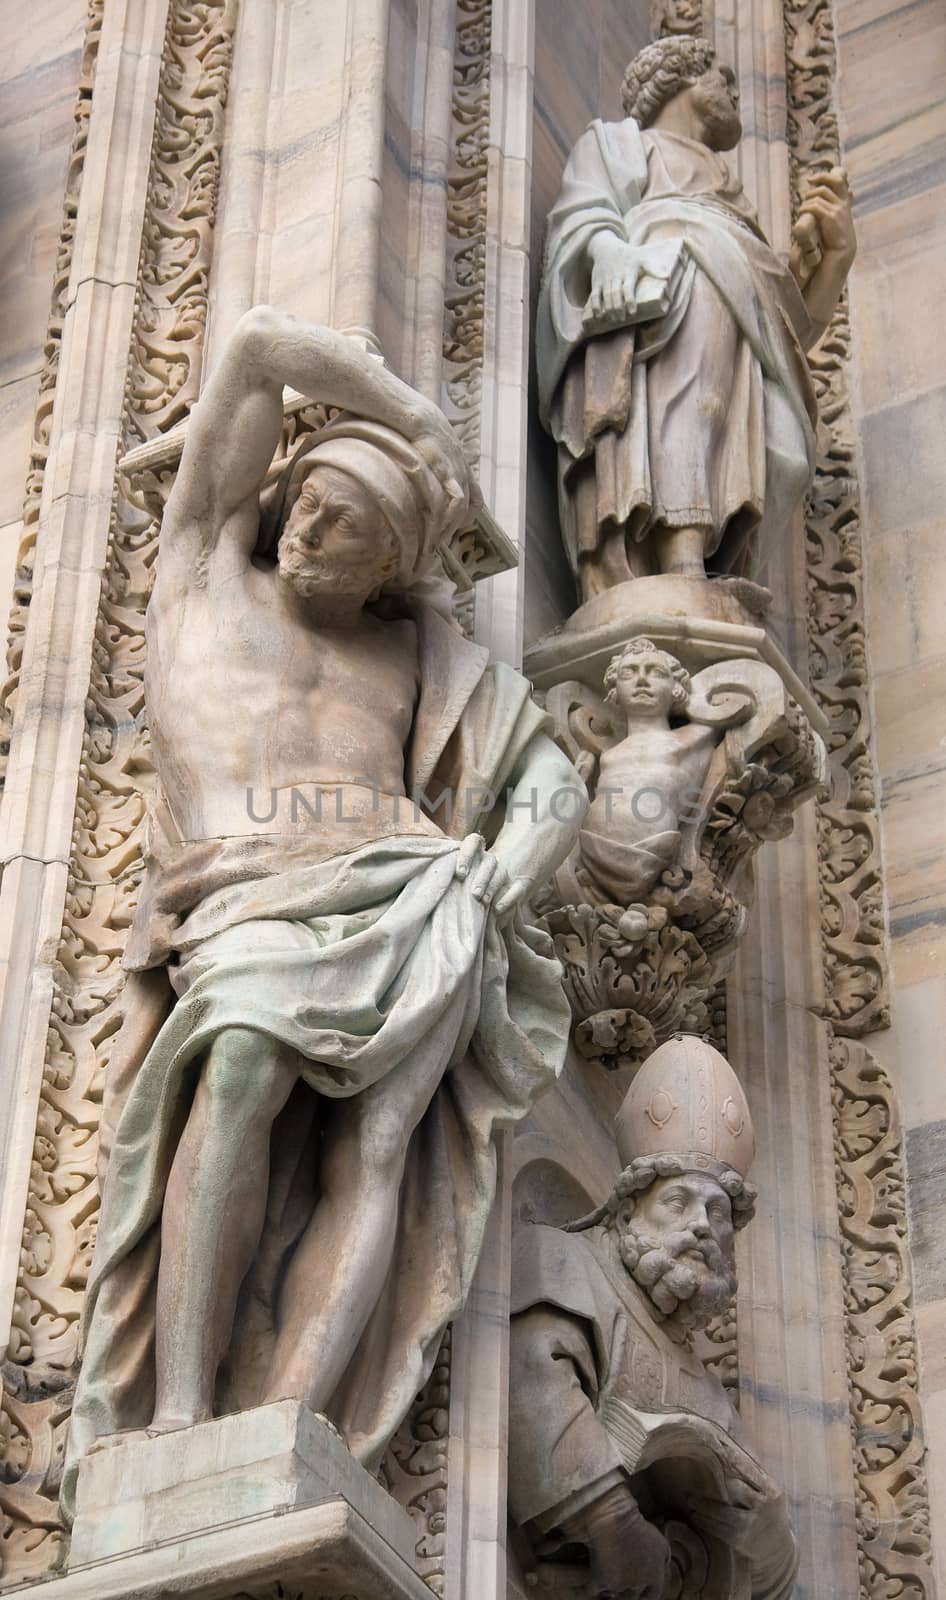 Sculptures on the cathedral in Milan, Italy  by fotoecho